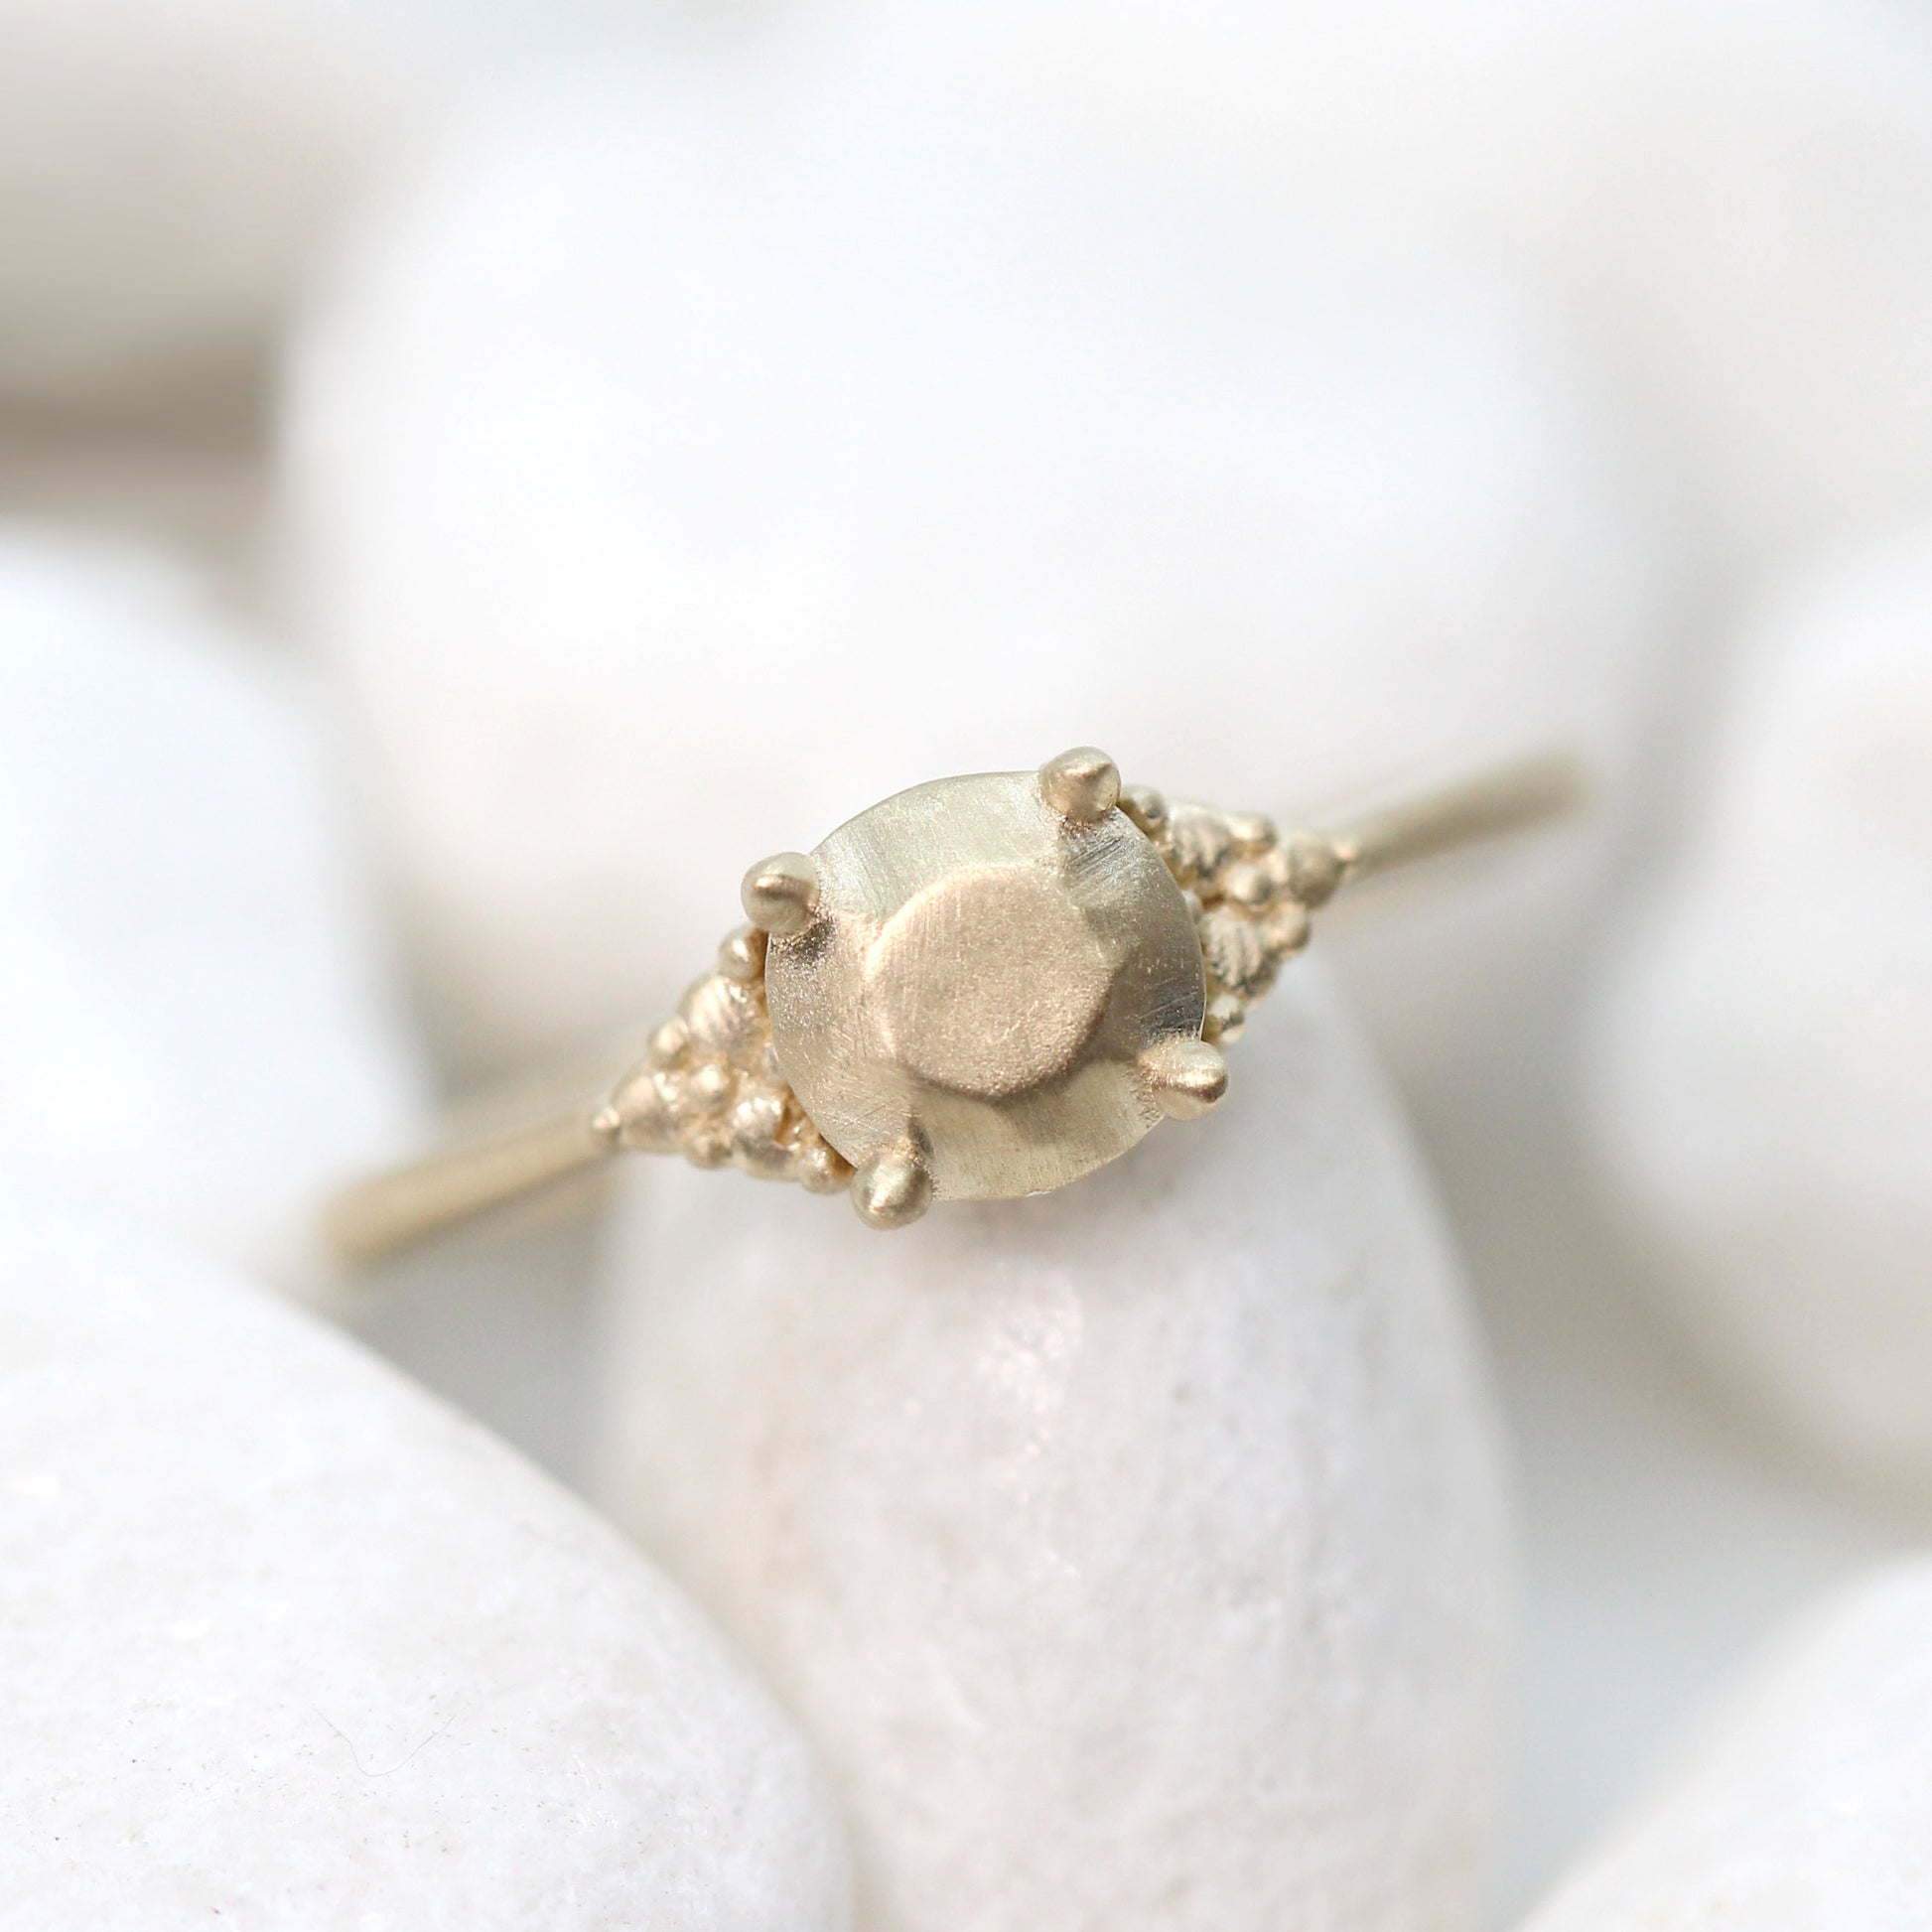 Solid Imogene Ring with 1 Carat Round Gold Stone in your choice of 14k gold - Midwinter Co. Alternative Bridal Rings and Modern Fine Jewelry